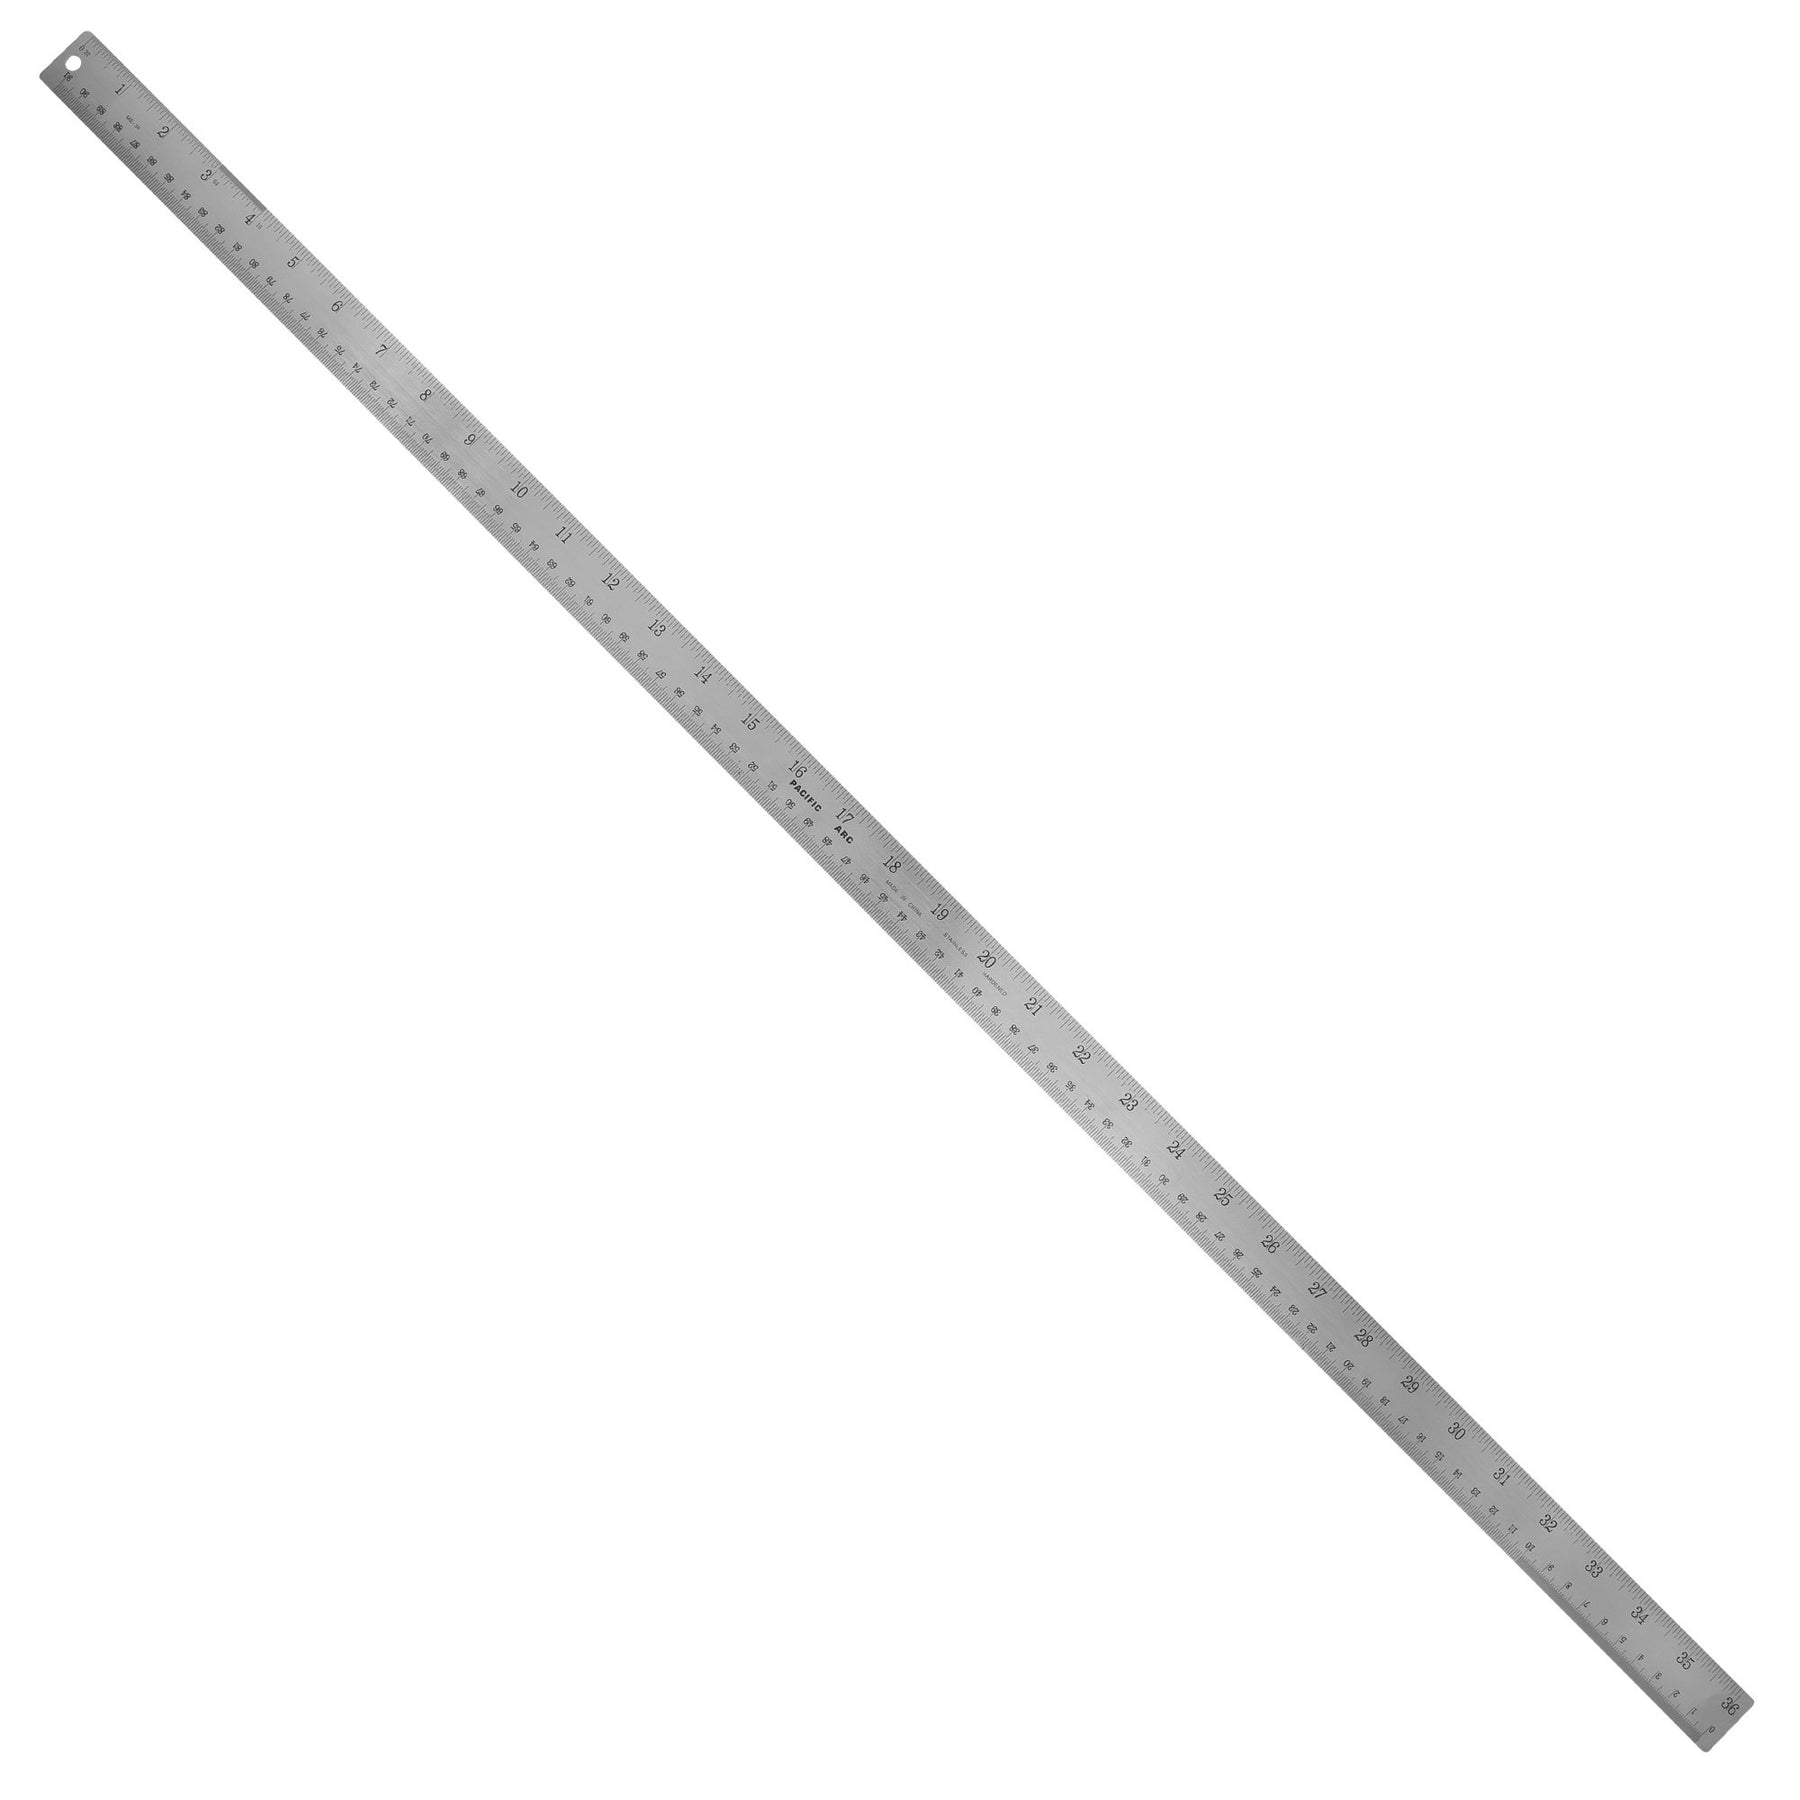 Pacific Arc Stainless-Steel Cork-Back Ruler - 12